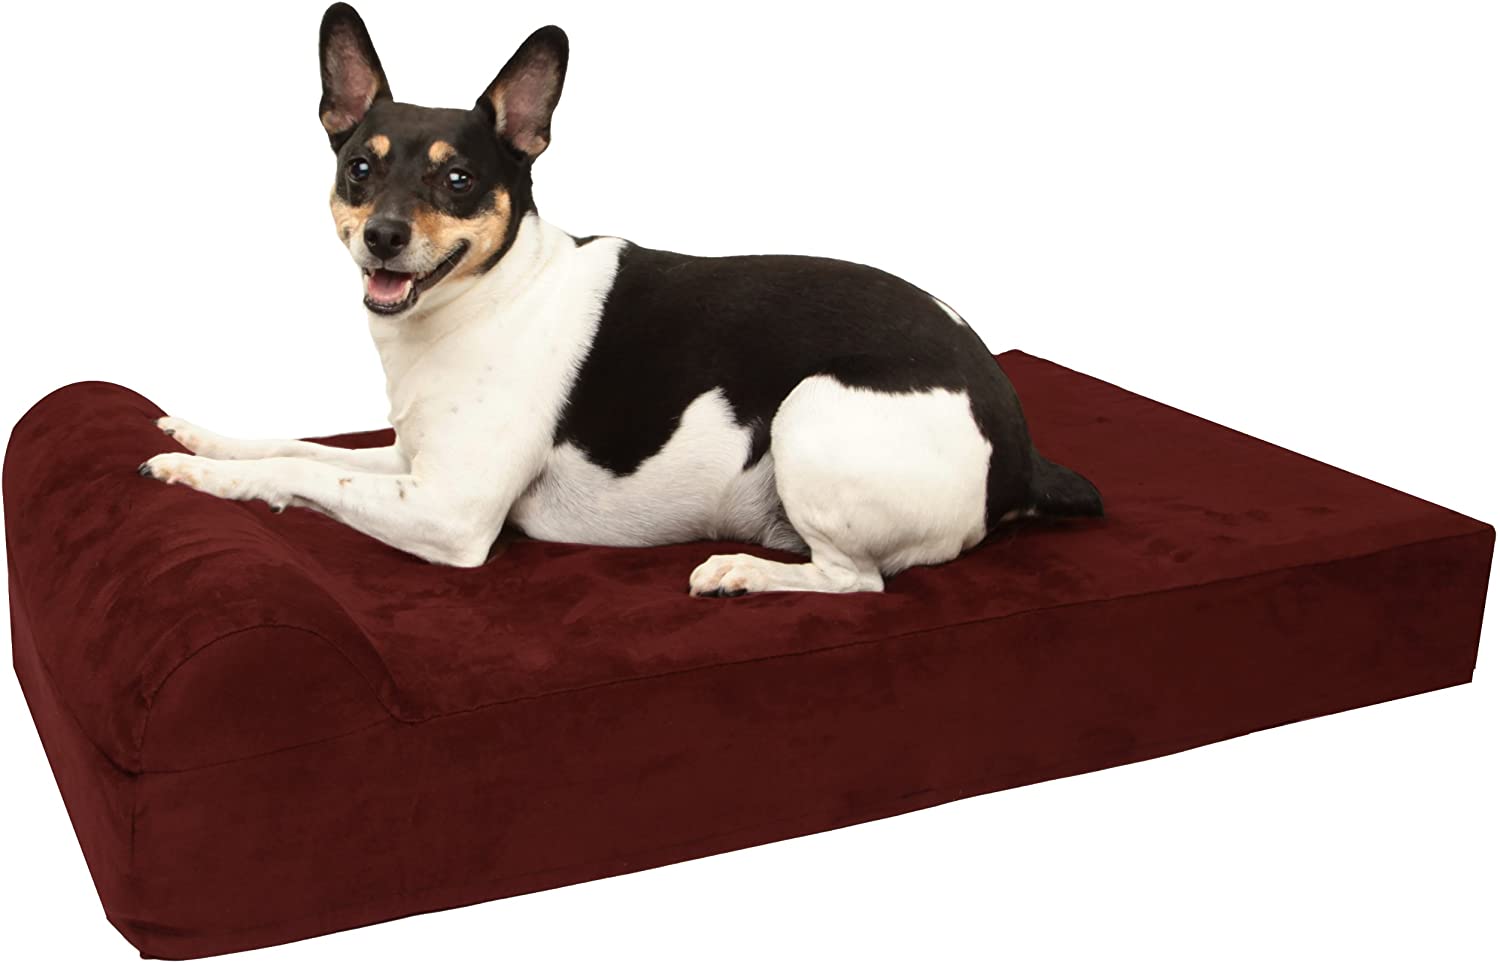 Barker Junior 4-inches Pillow Top Orthopedic Dog Bed